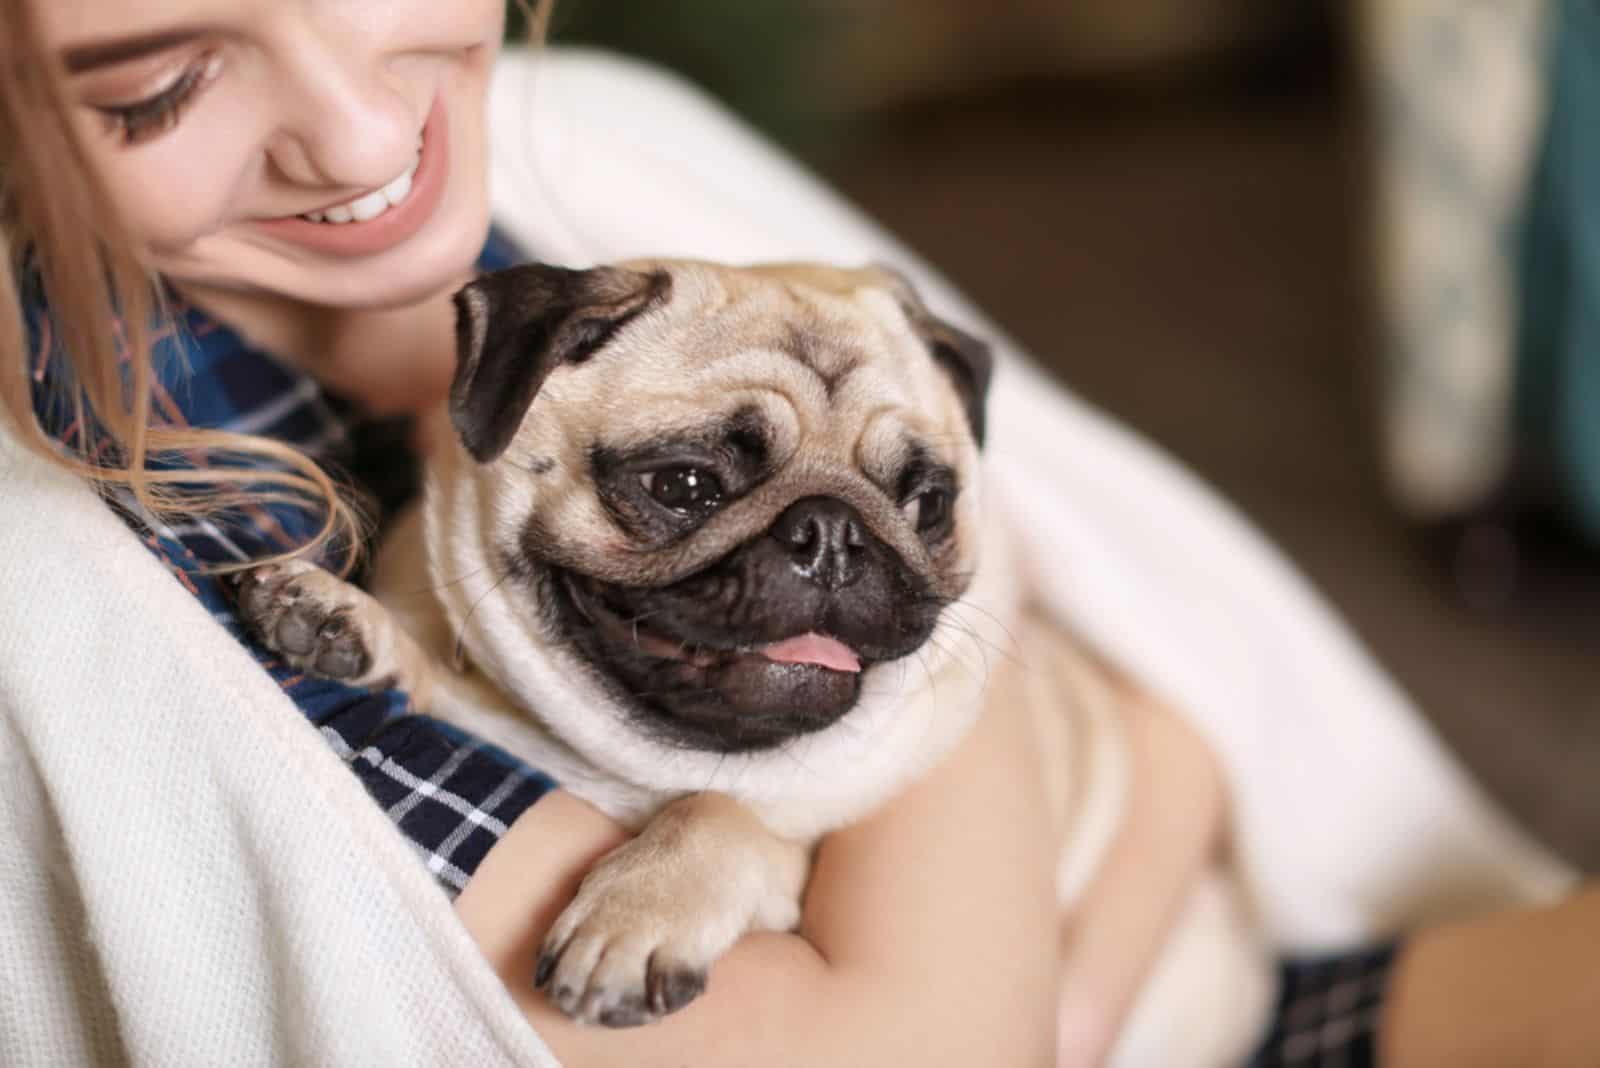 woman holding pug dog in her arms at home